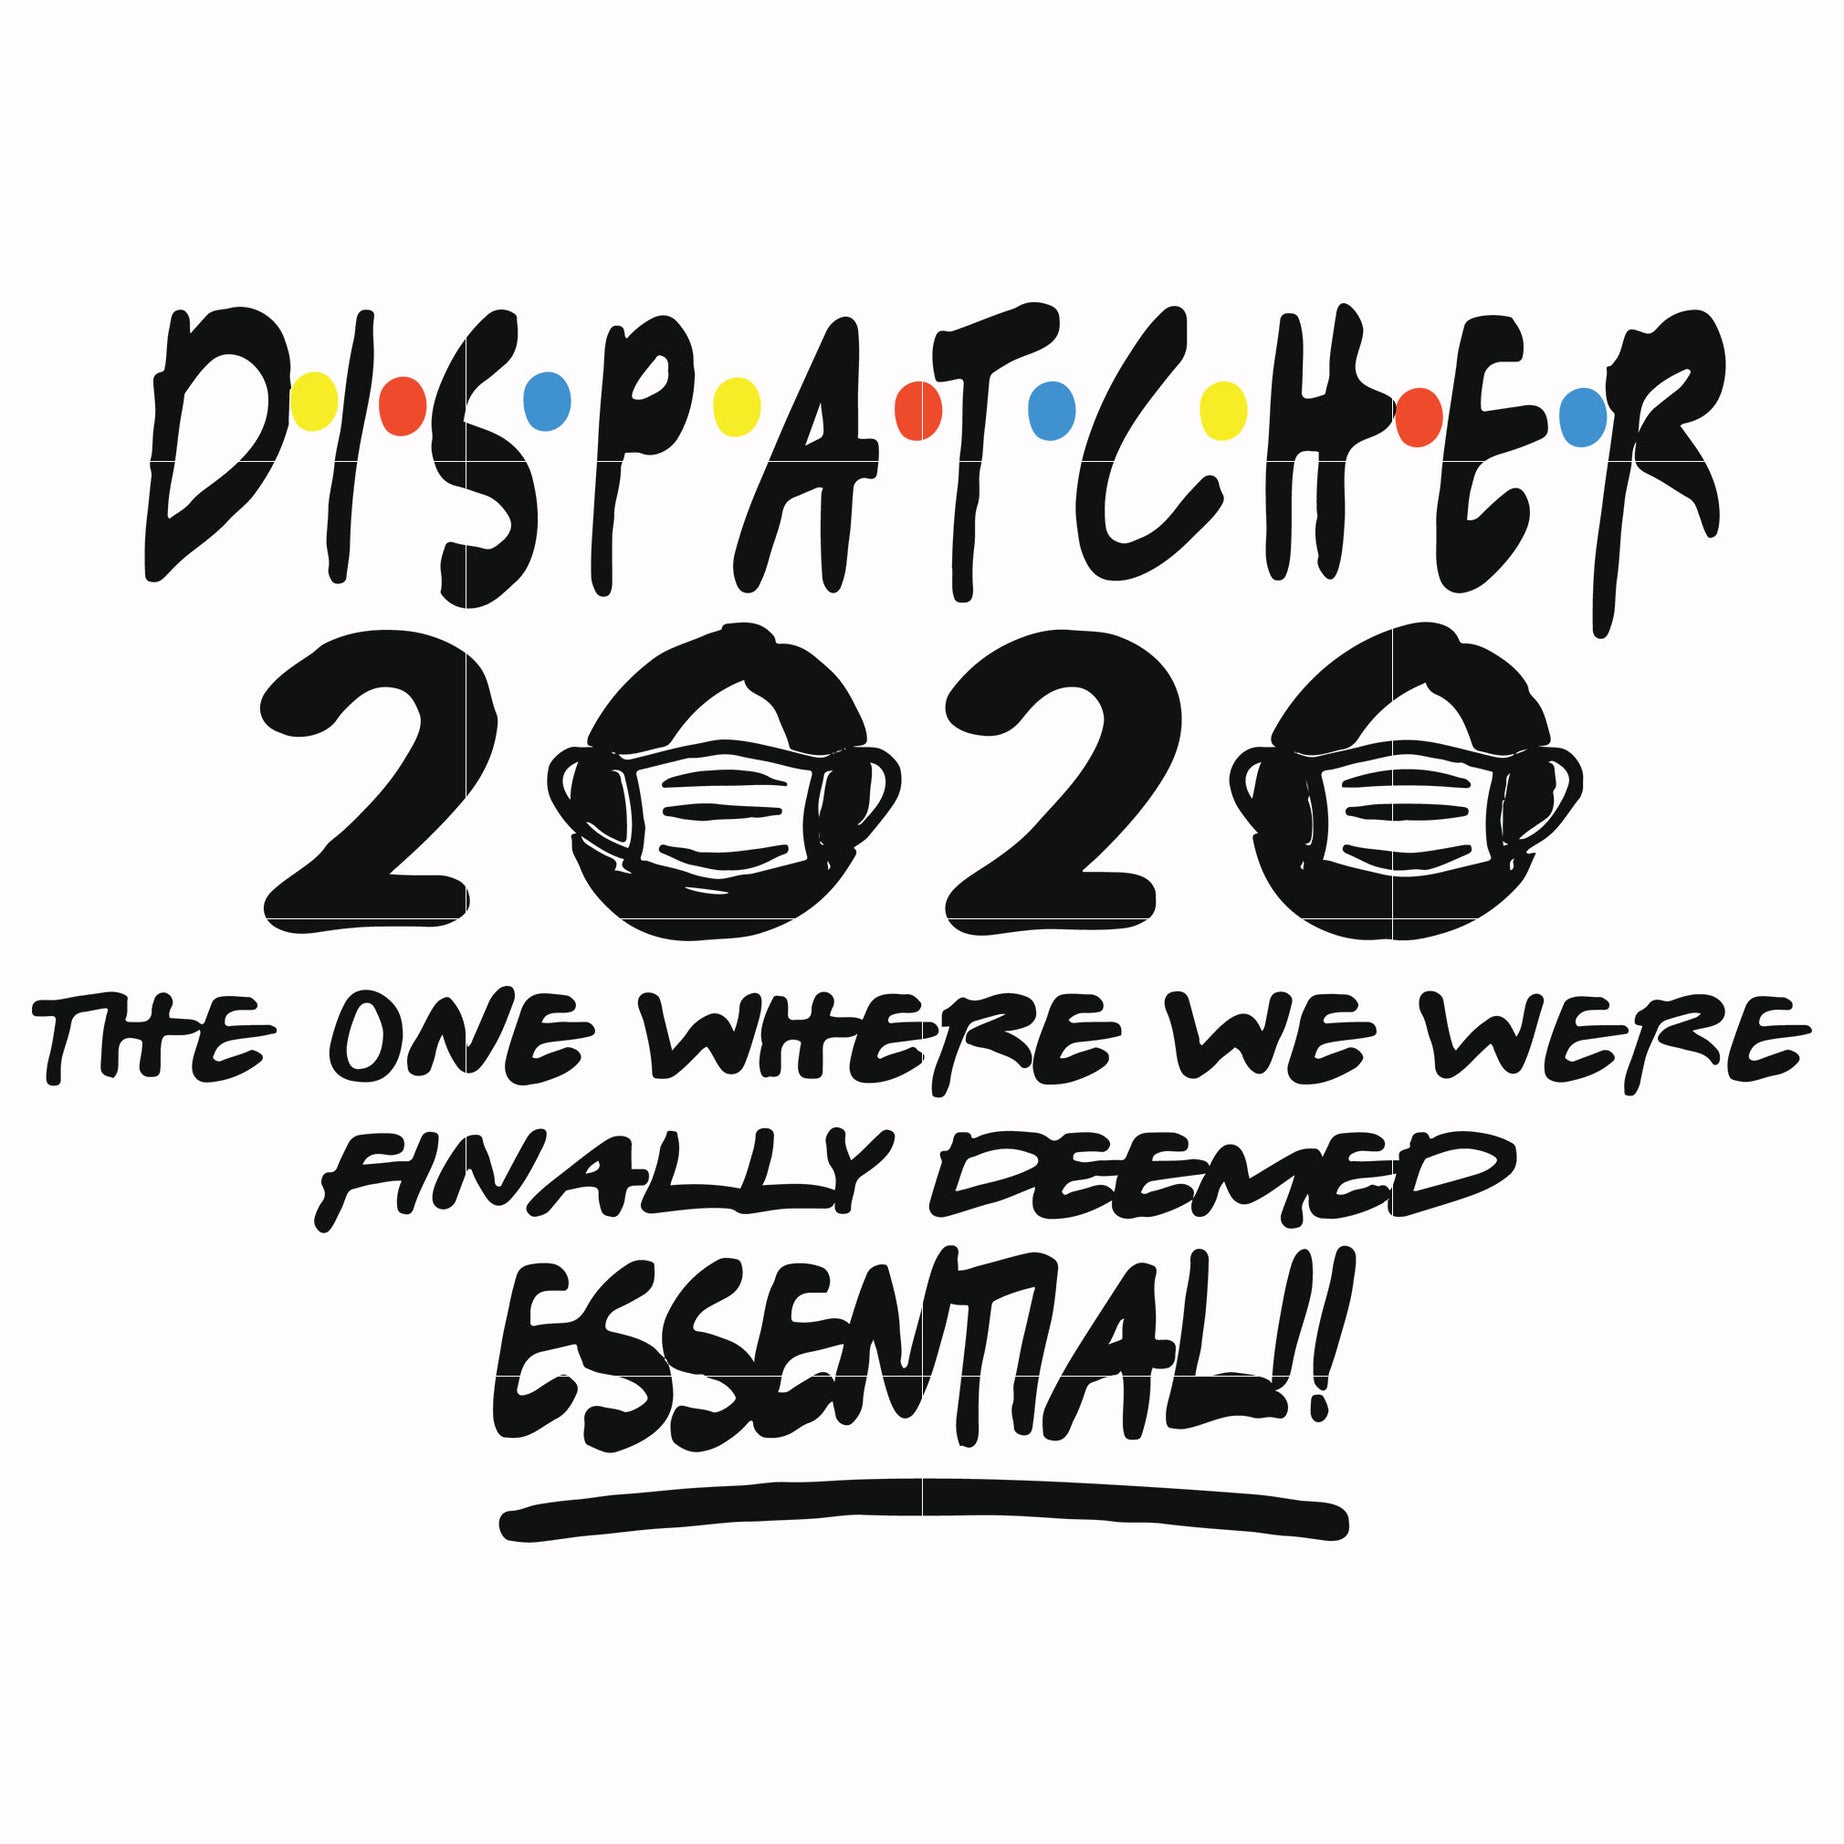 Dispatcher 2020 the one where we were finally deemed essential svg, png, dxf, eps file FN0001017